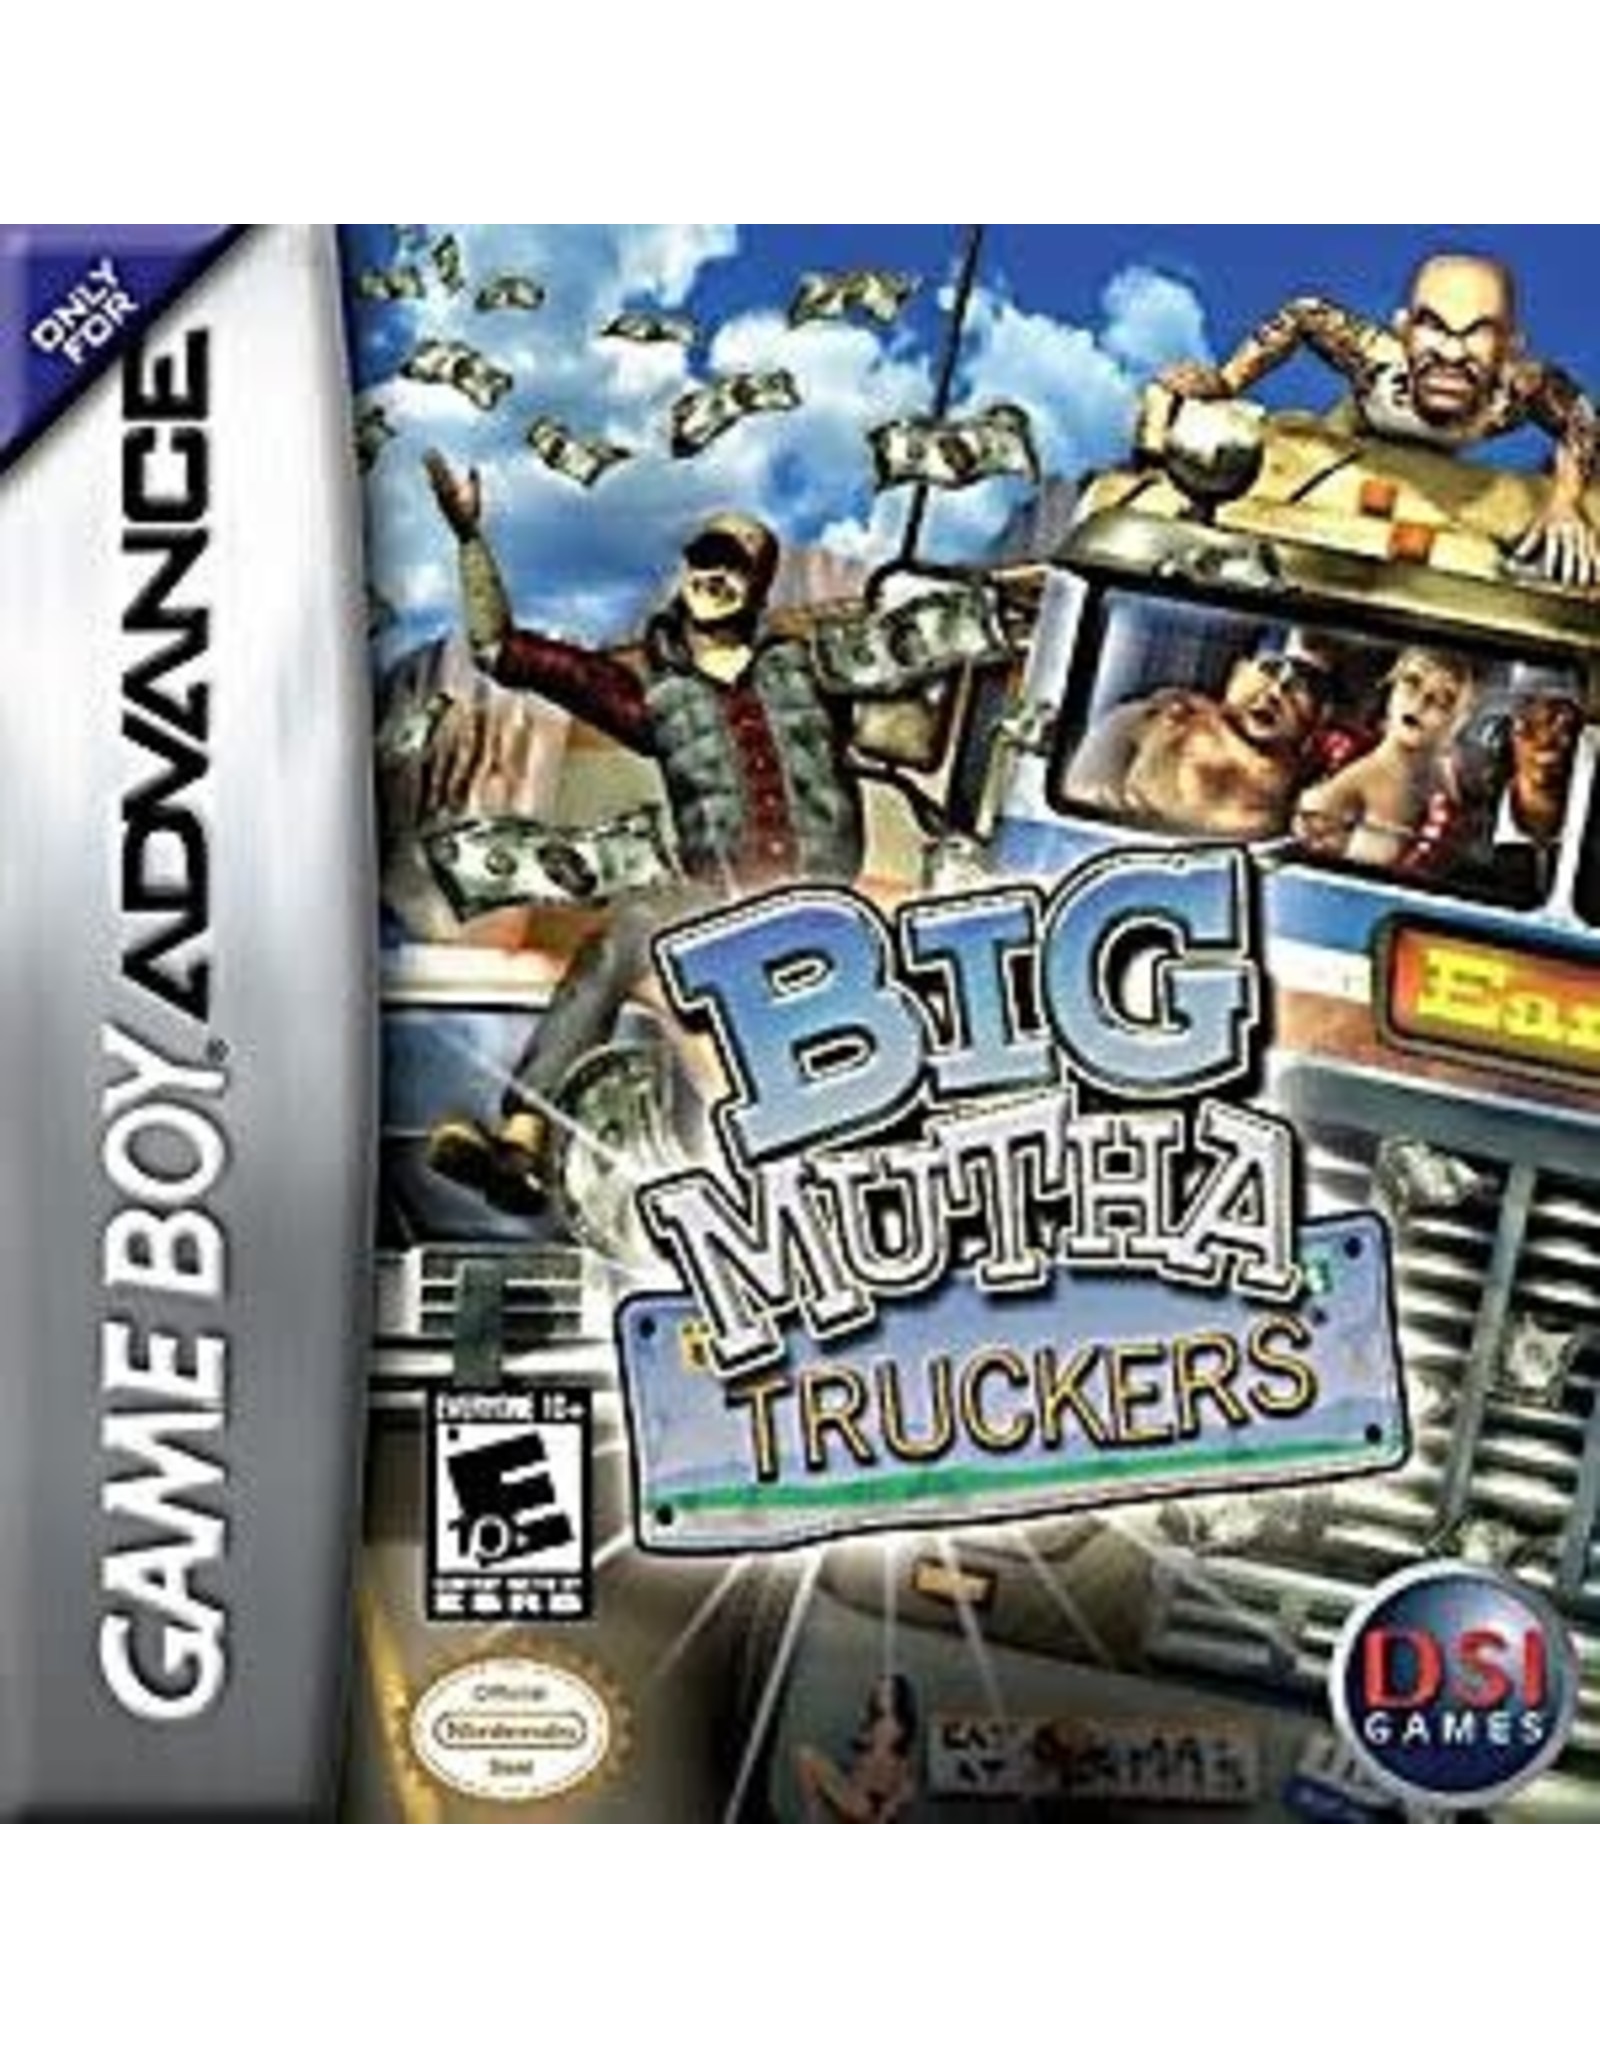 Game Boy Advance Big Mutha Truckers (Cart Only)